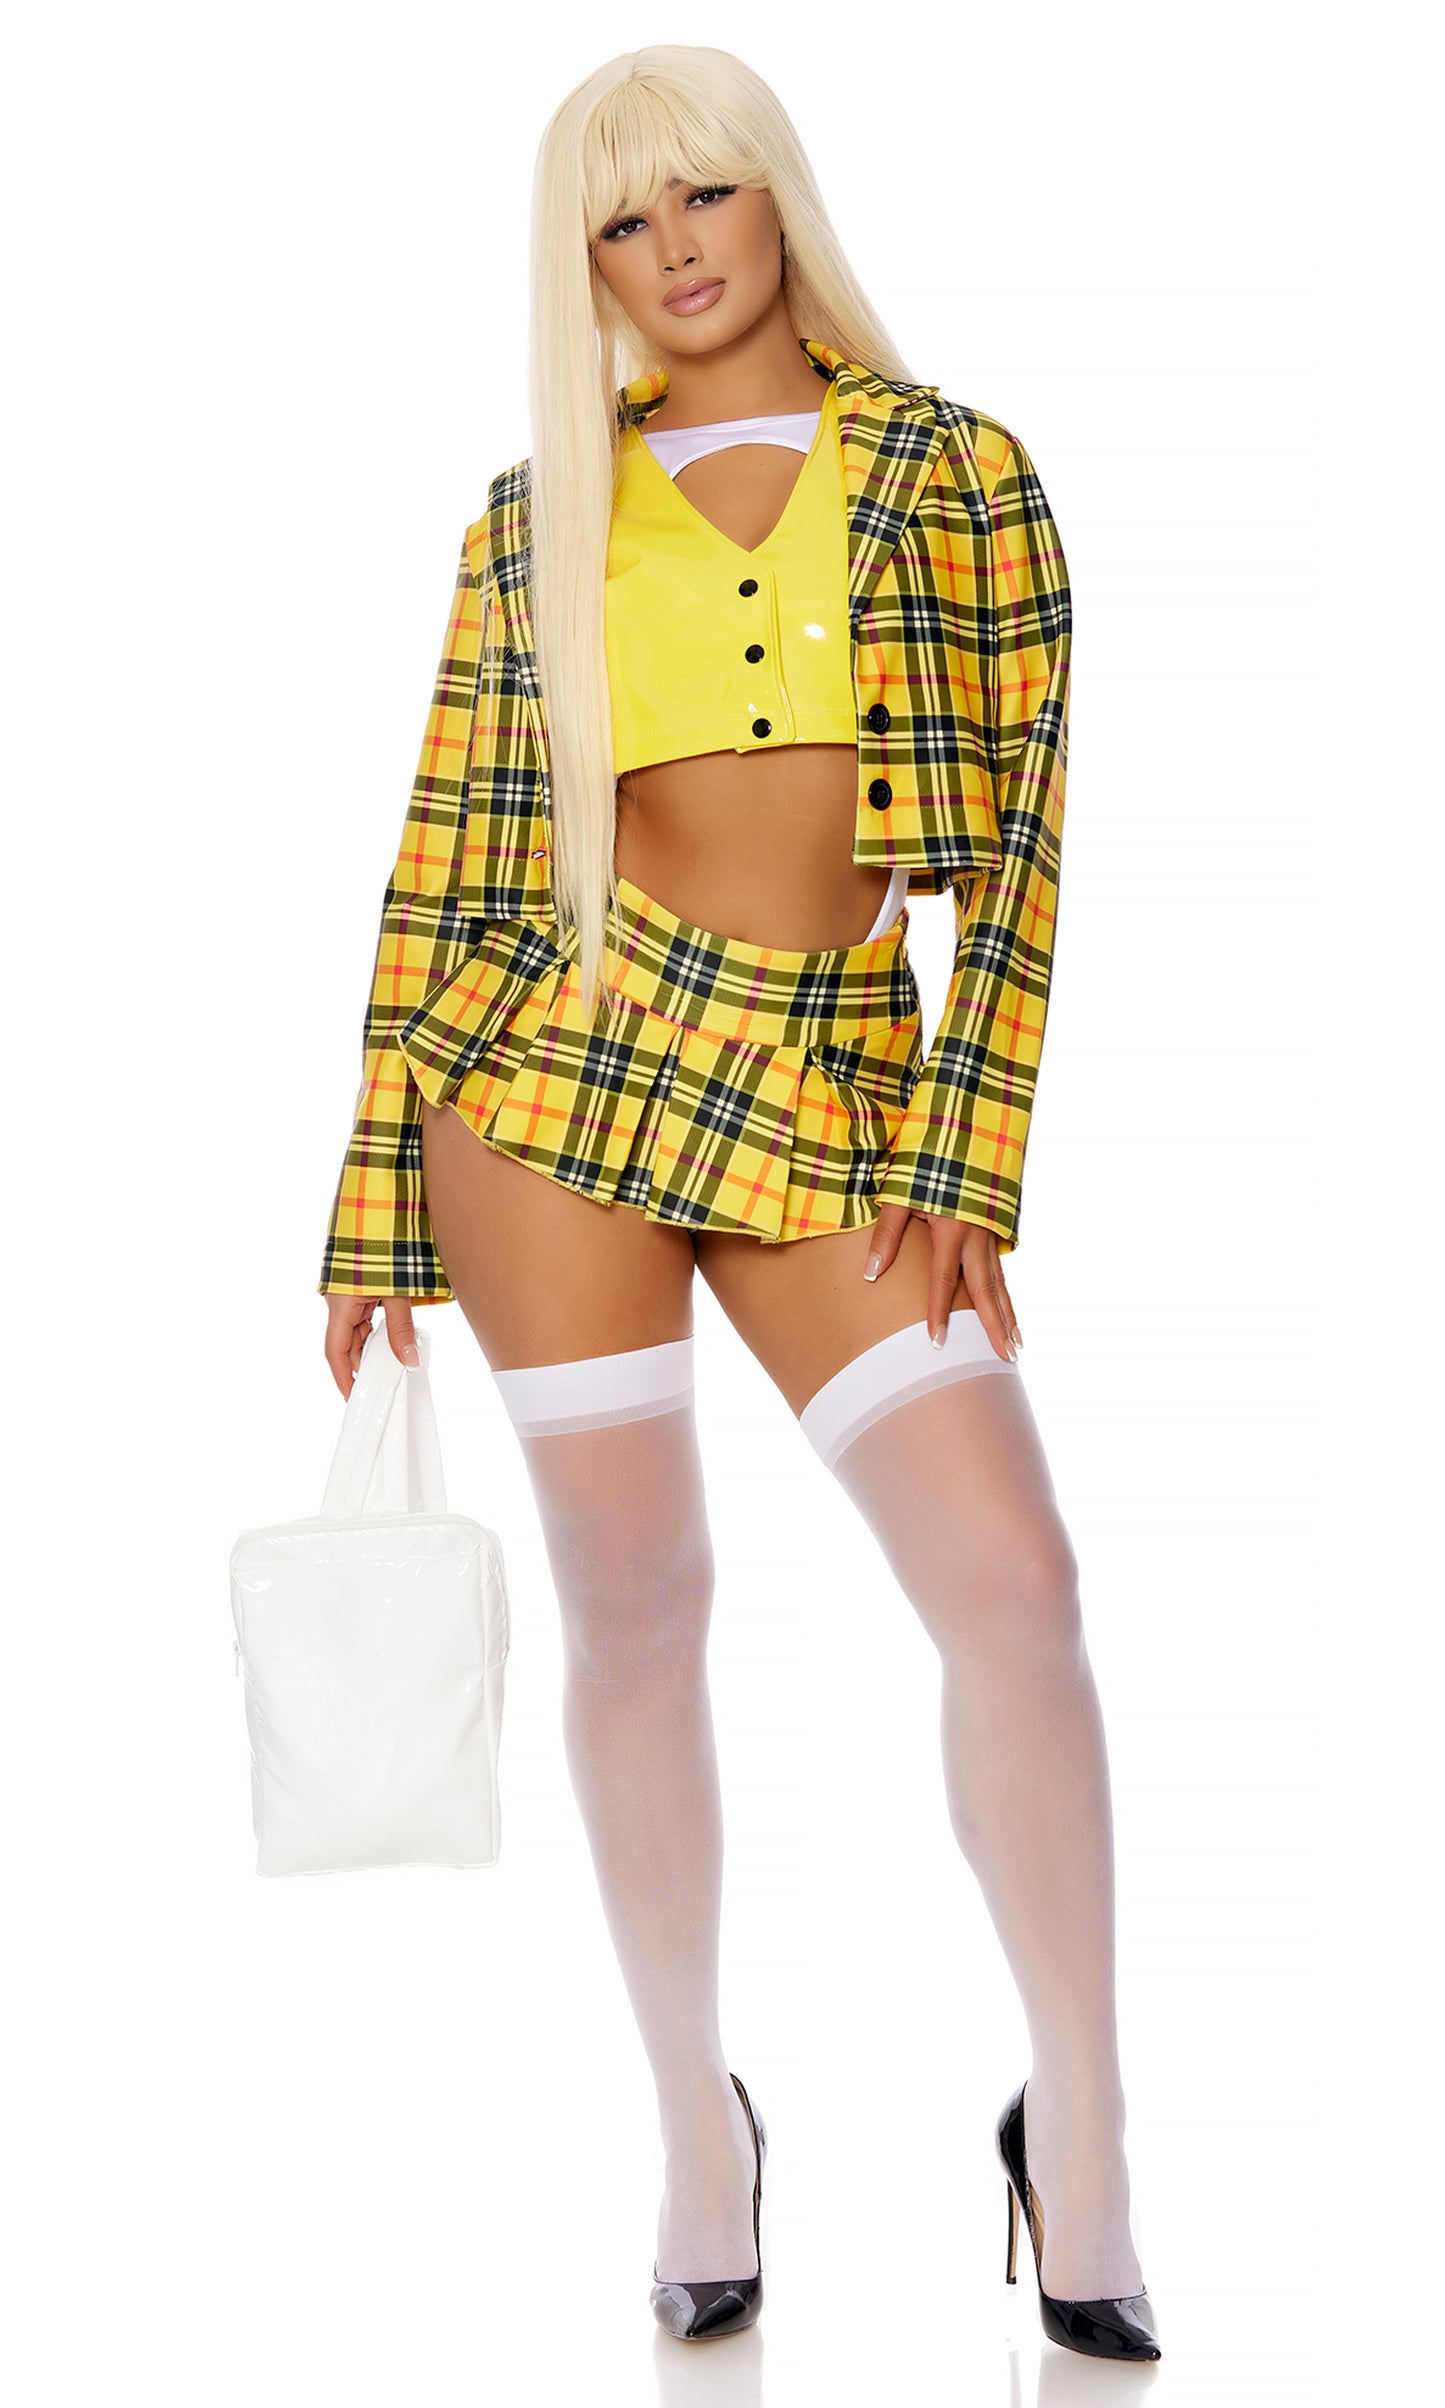 As If Sexy Movie Character Costume